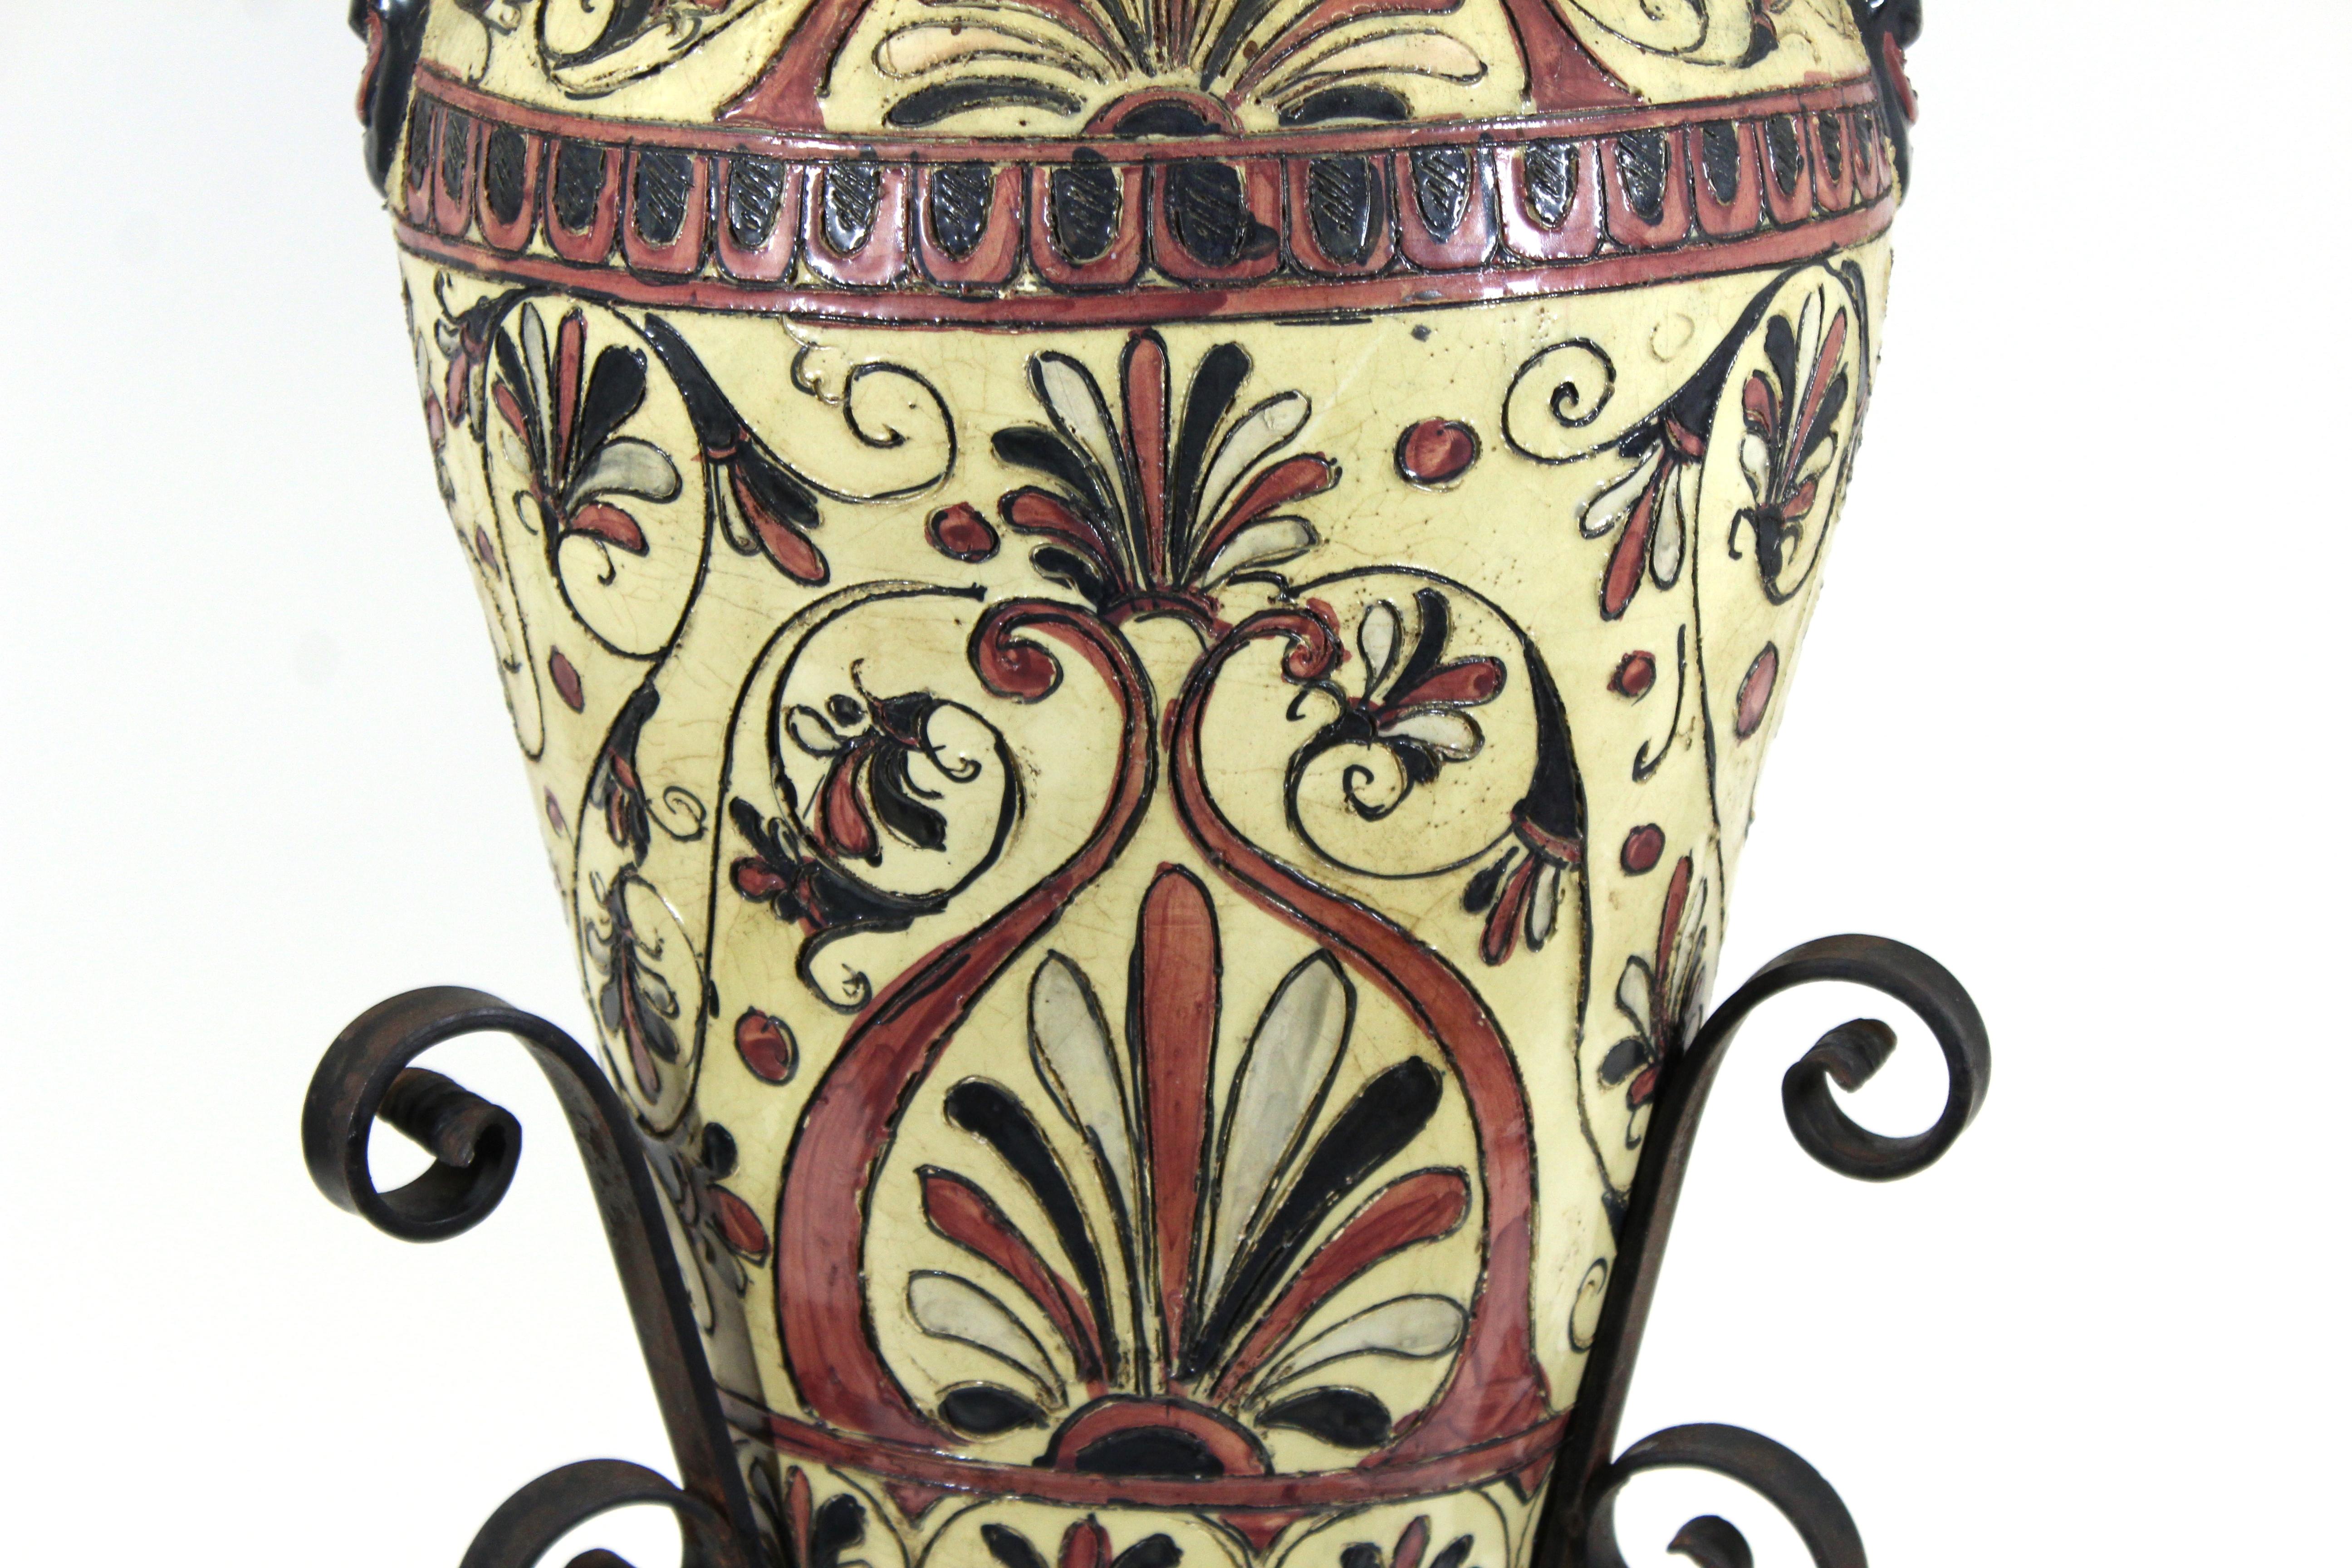 Late 19th Century Italian Neoclassical Revival Sgraffito Pink and Cream Urn on Wrought Iron Base